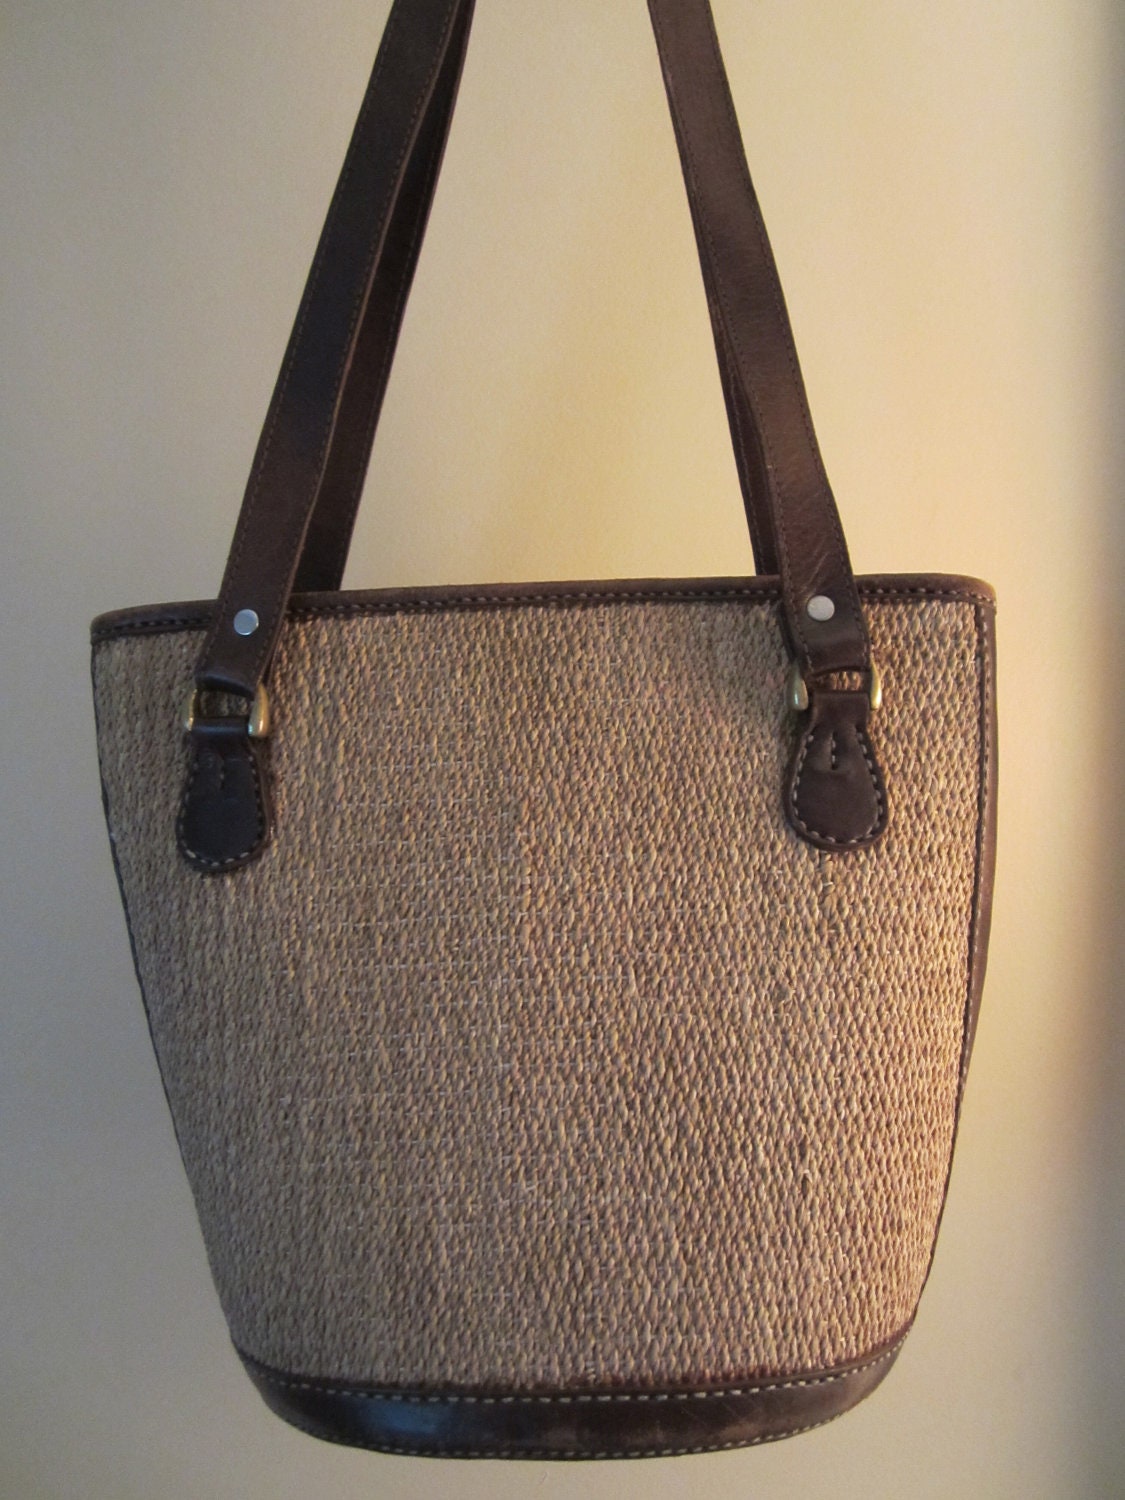 Vintage Ethnic Straw Bag with Leather Trim by handknitpalette